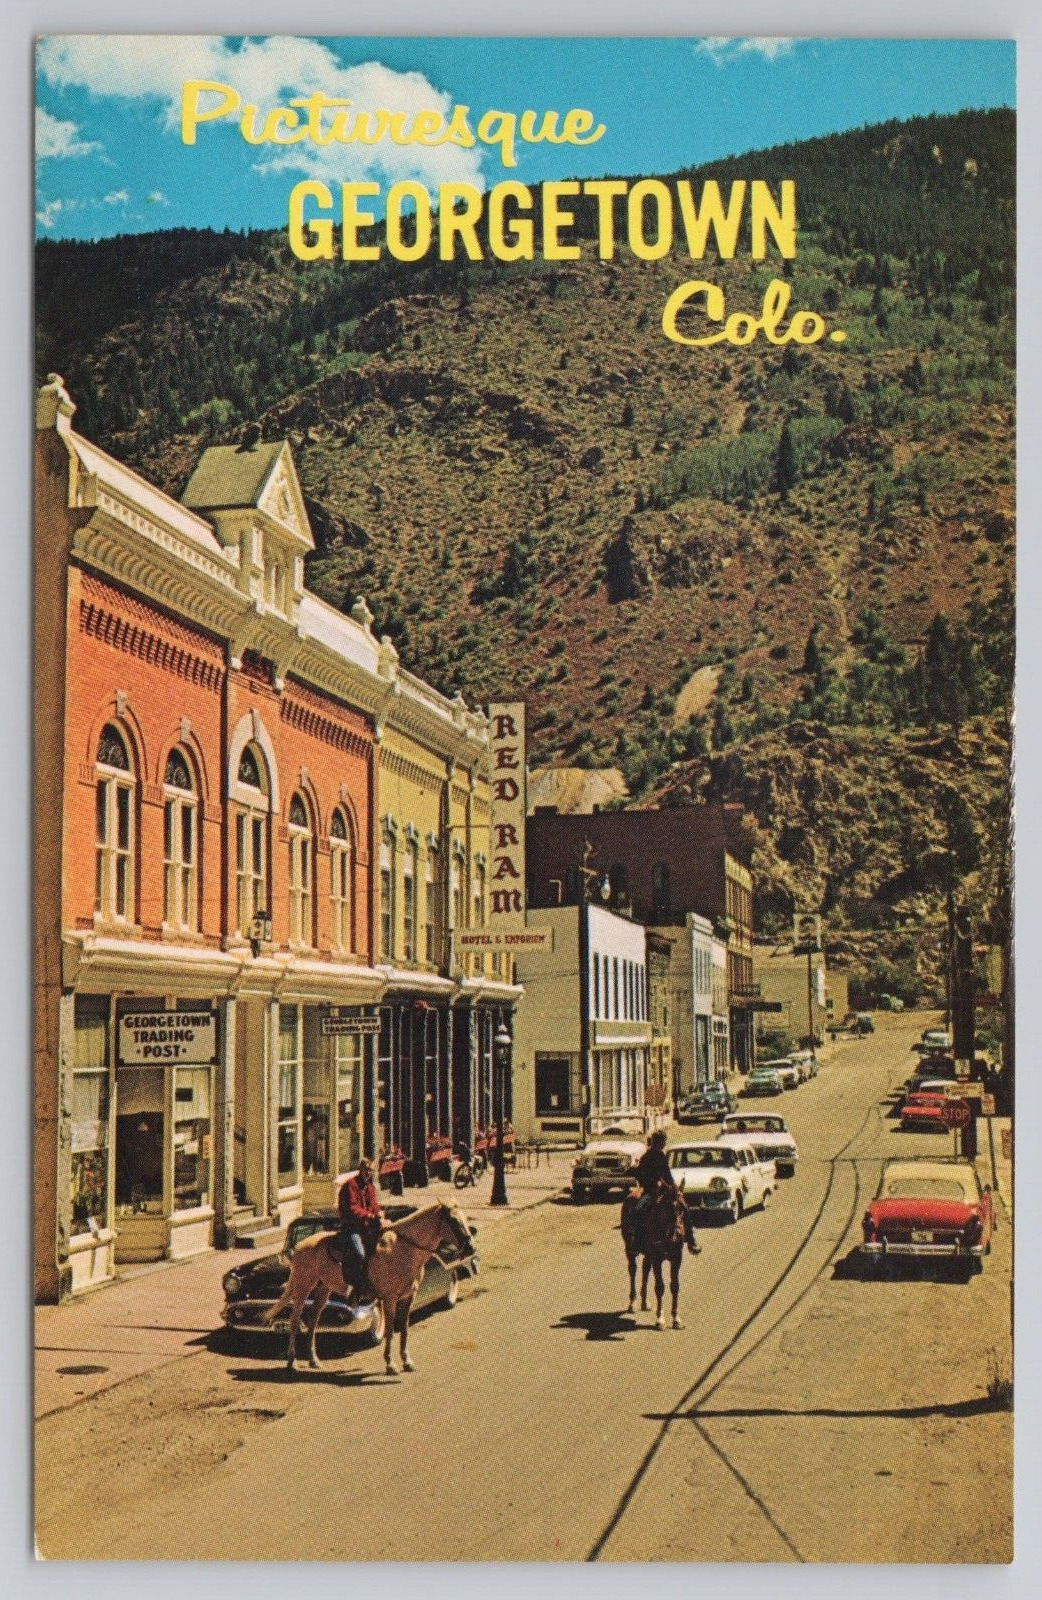 Picturesque Main Street Georgetown Colorado Mining Town 1960s Vintage Postcard